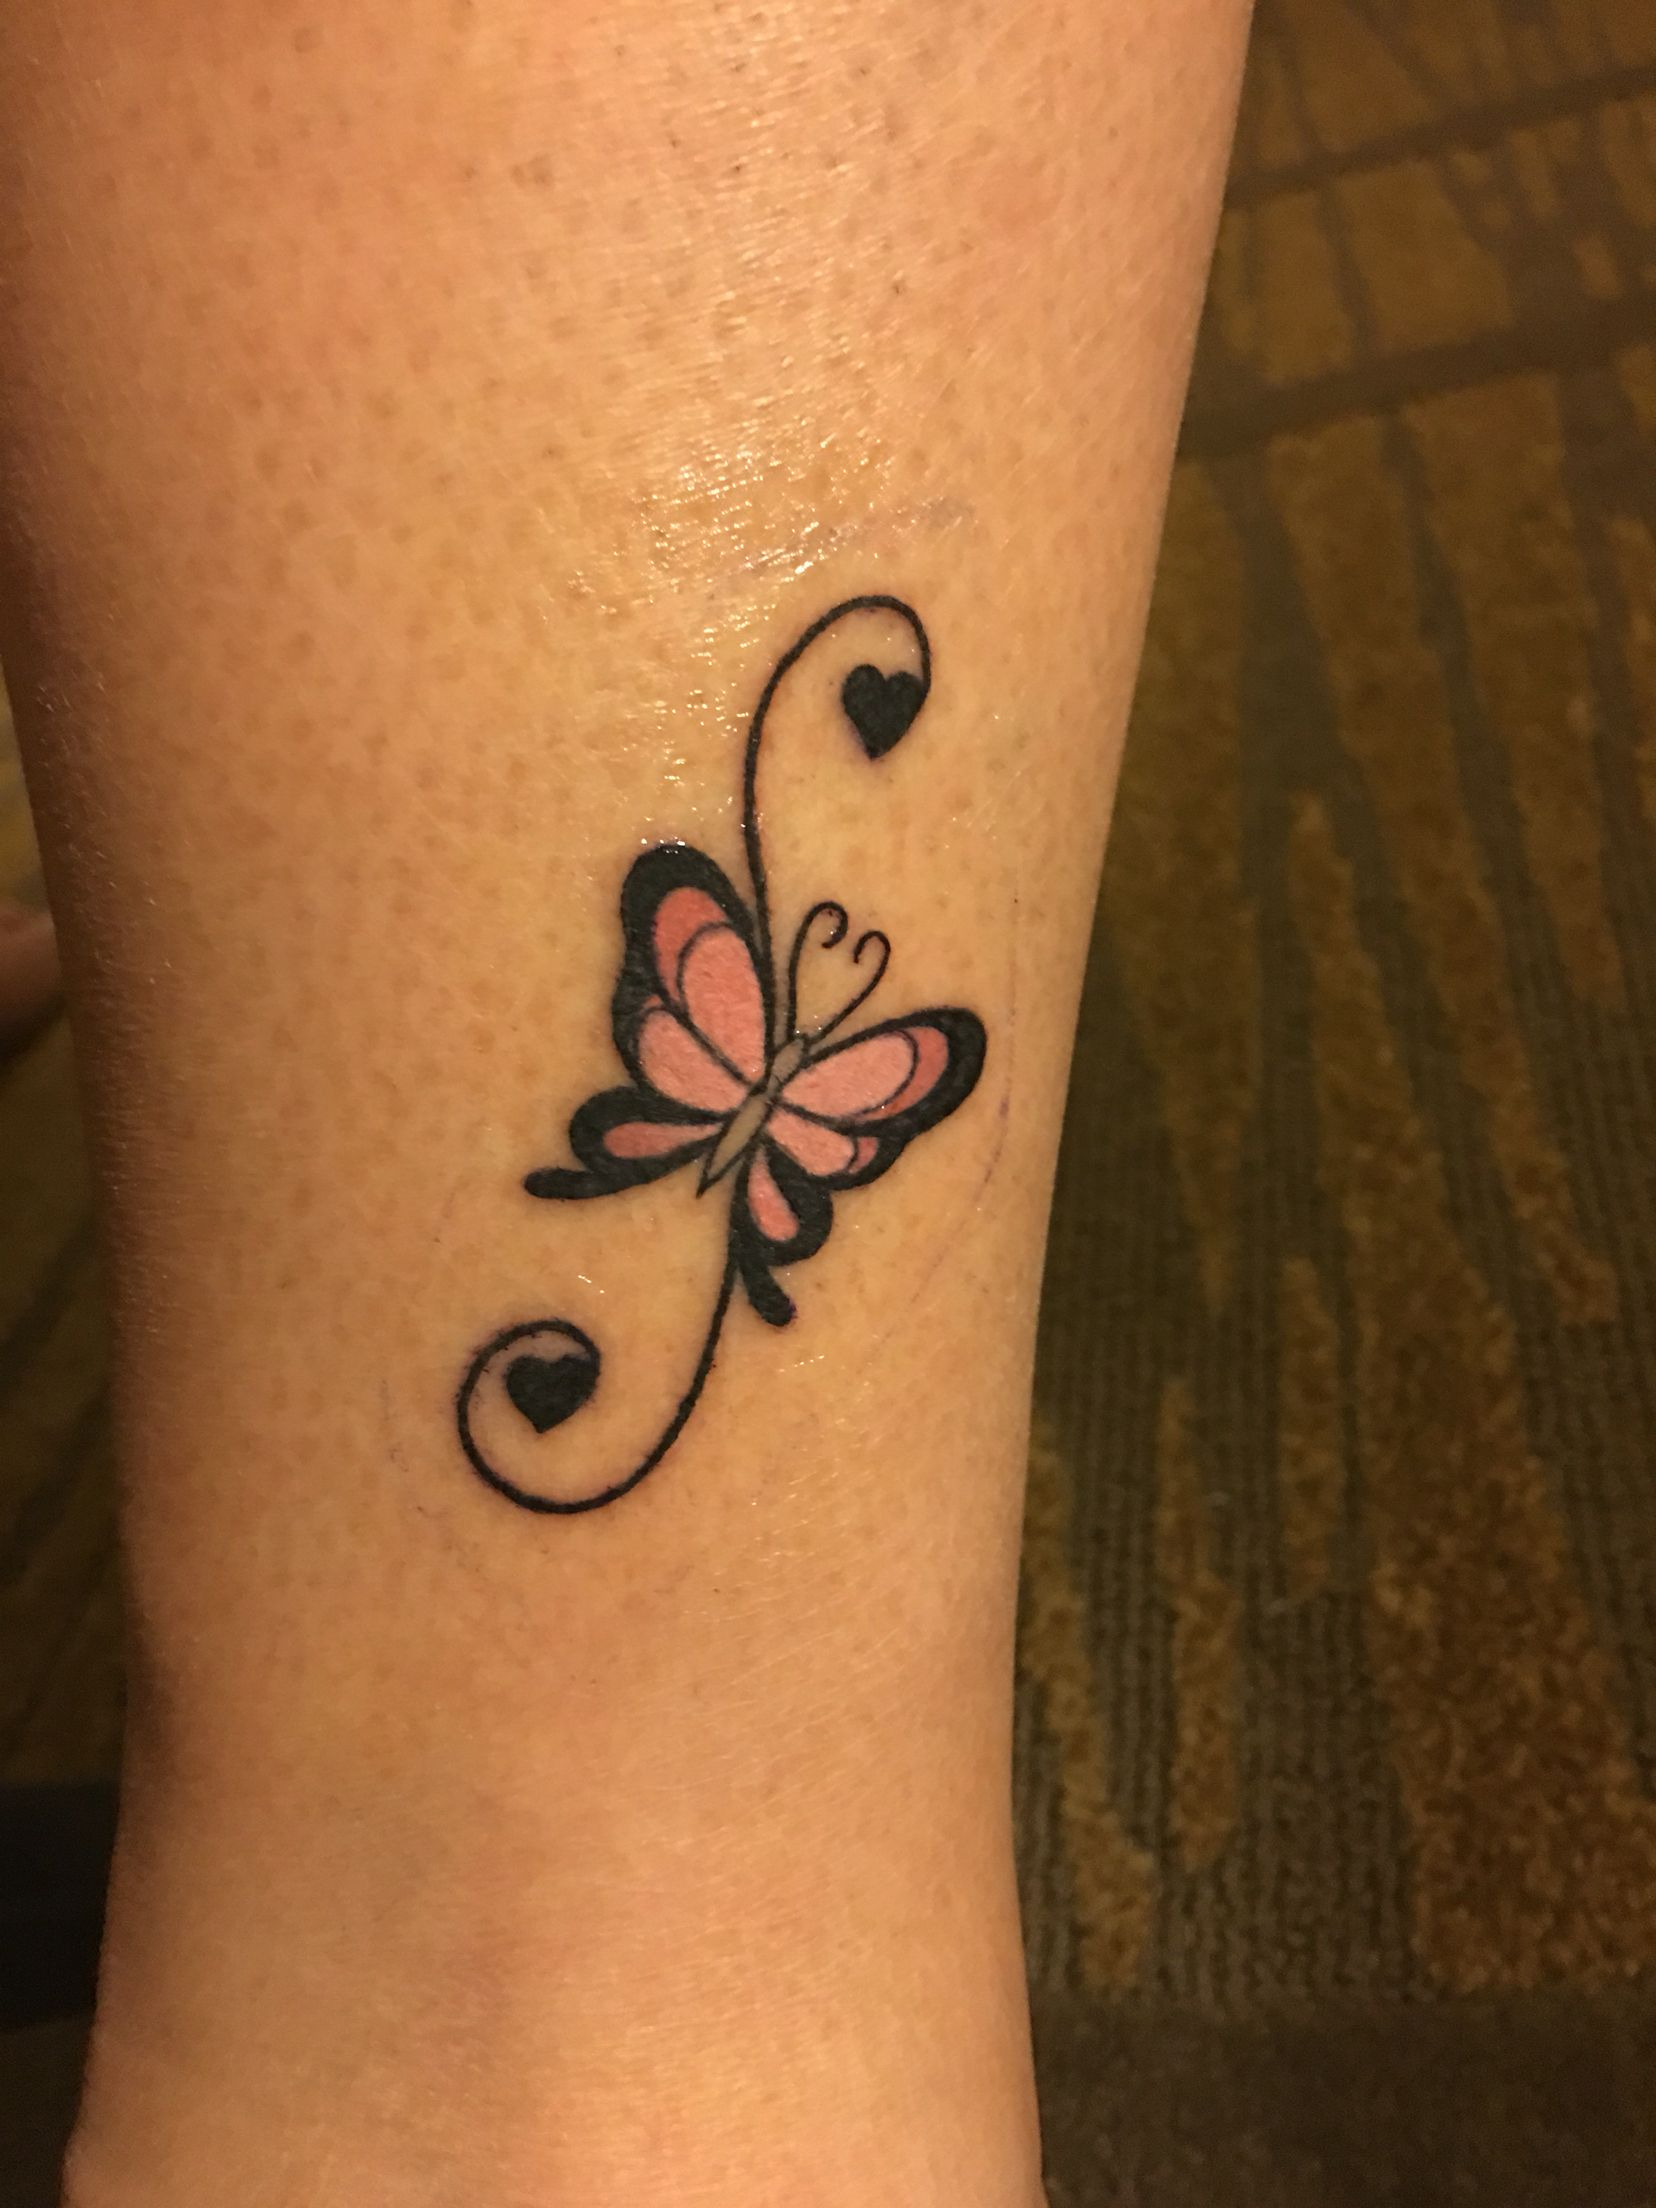 Feminine Butterfly Tattoo The Ankle With Swirls And Hearts The in measurements 1656 X 2208